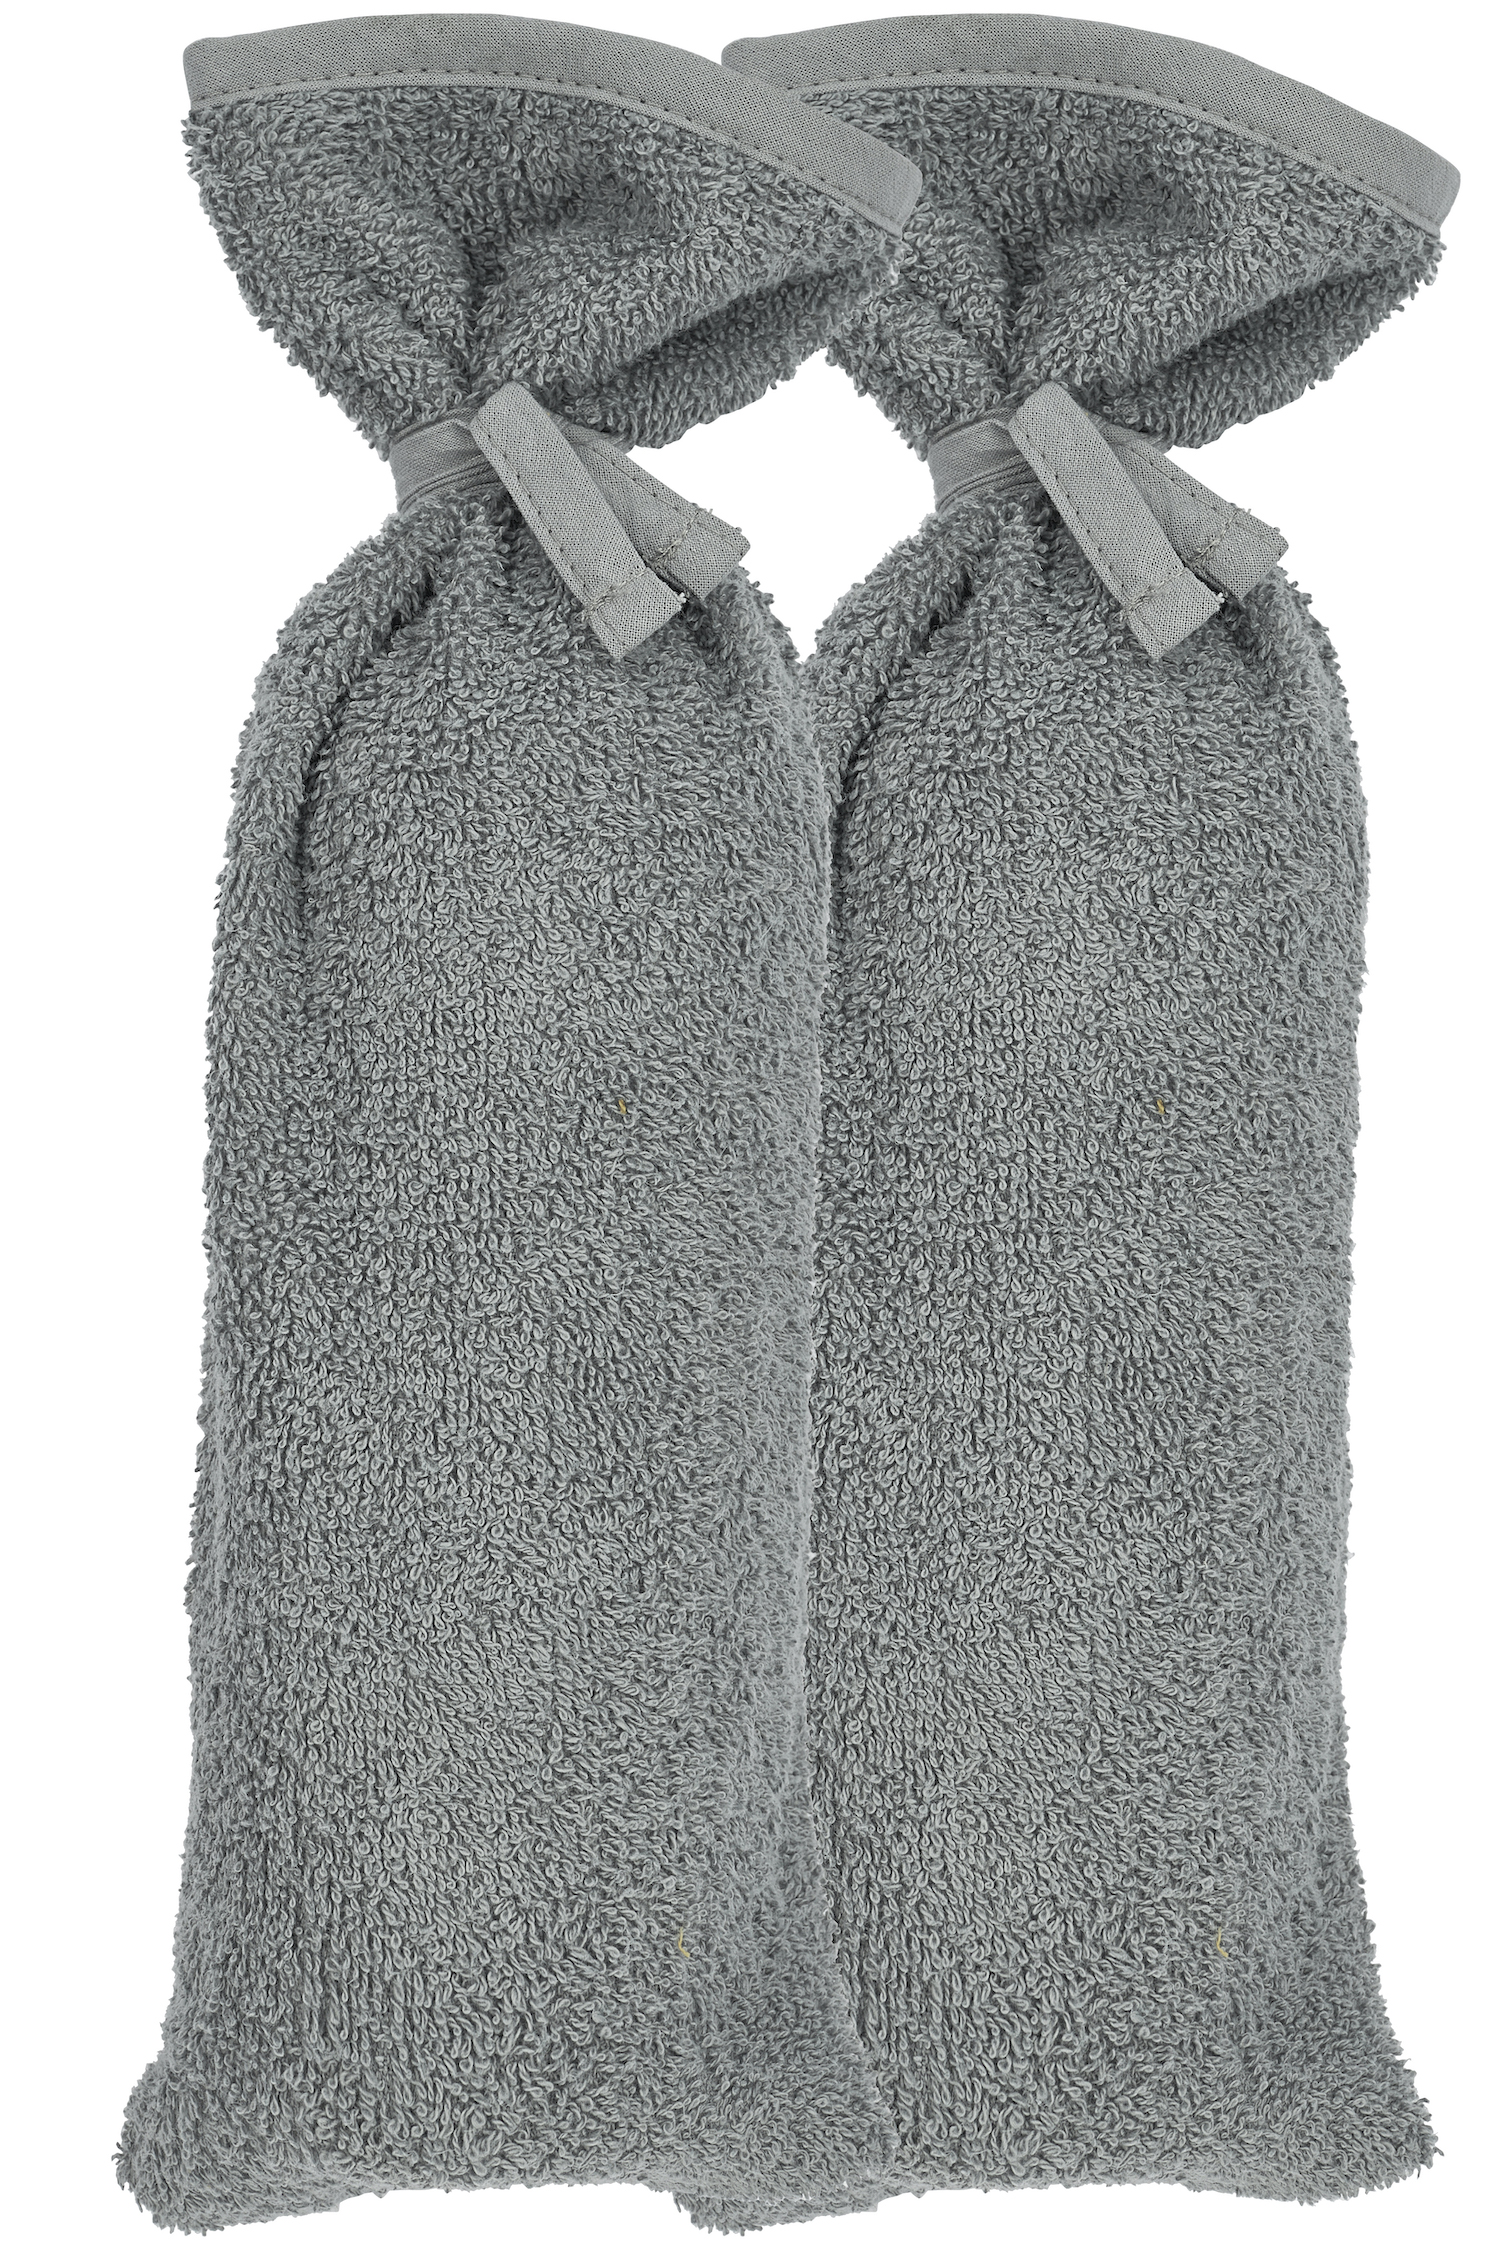 Hot Water Bottle Cover Basic Terry 2-pack - Grey - 13xh35cm